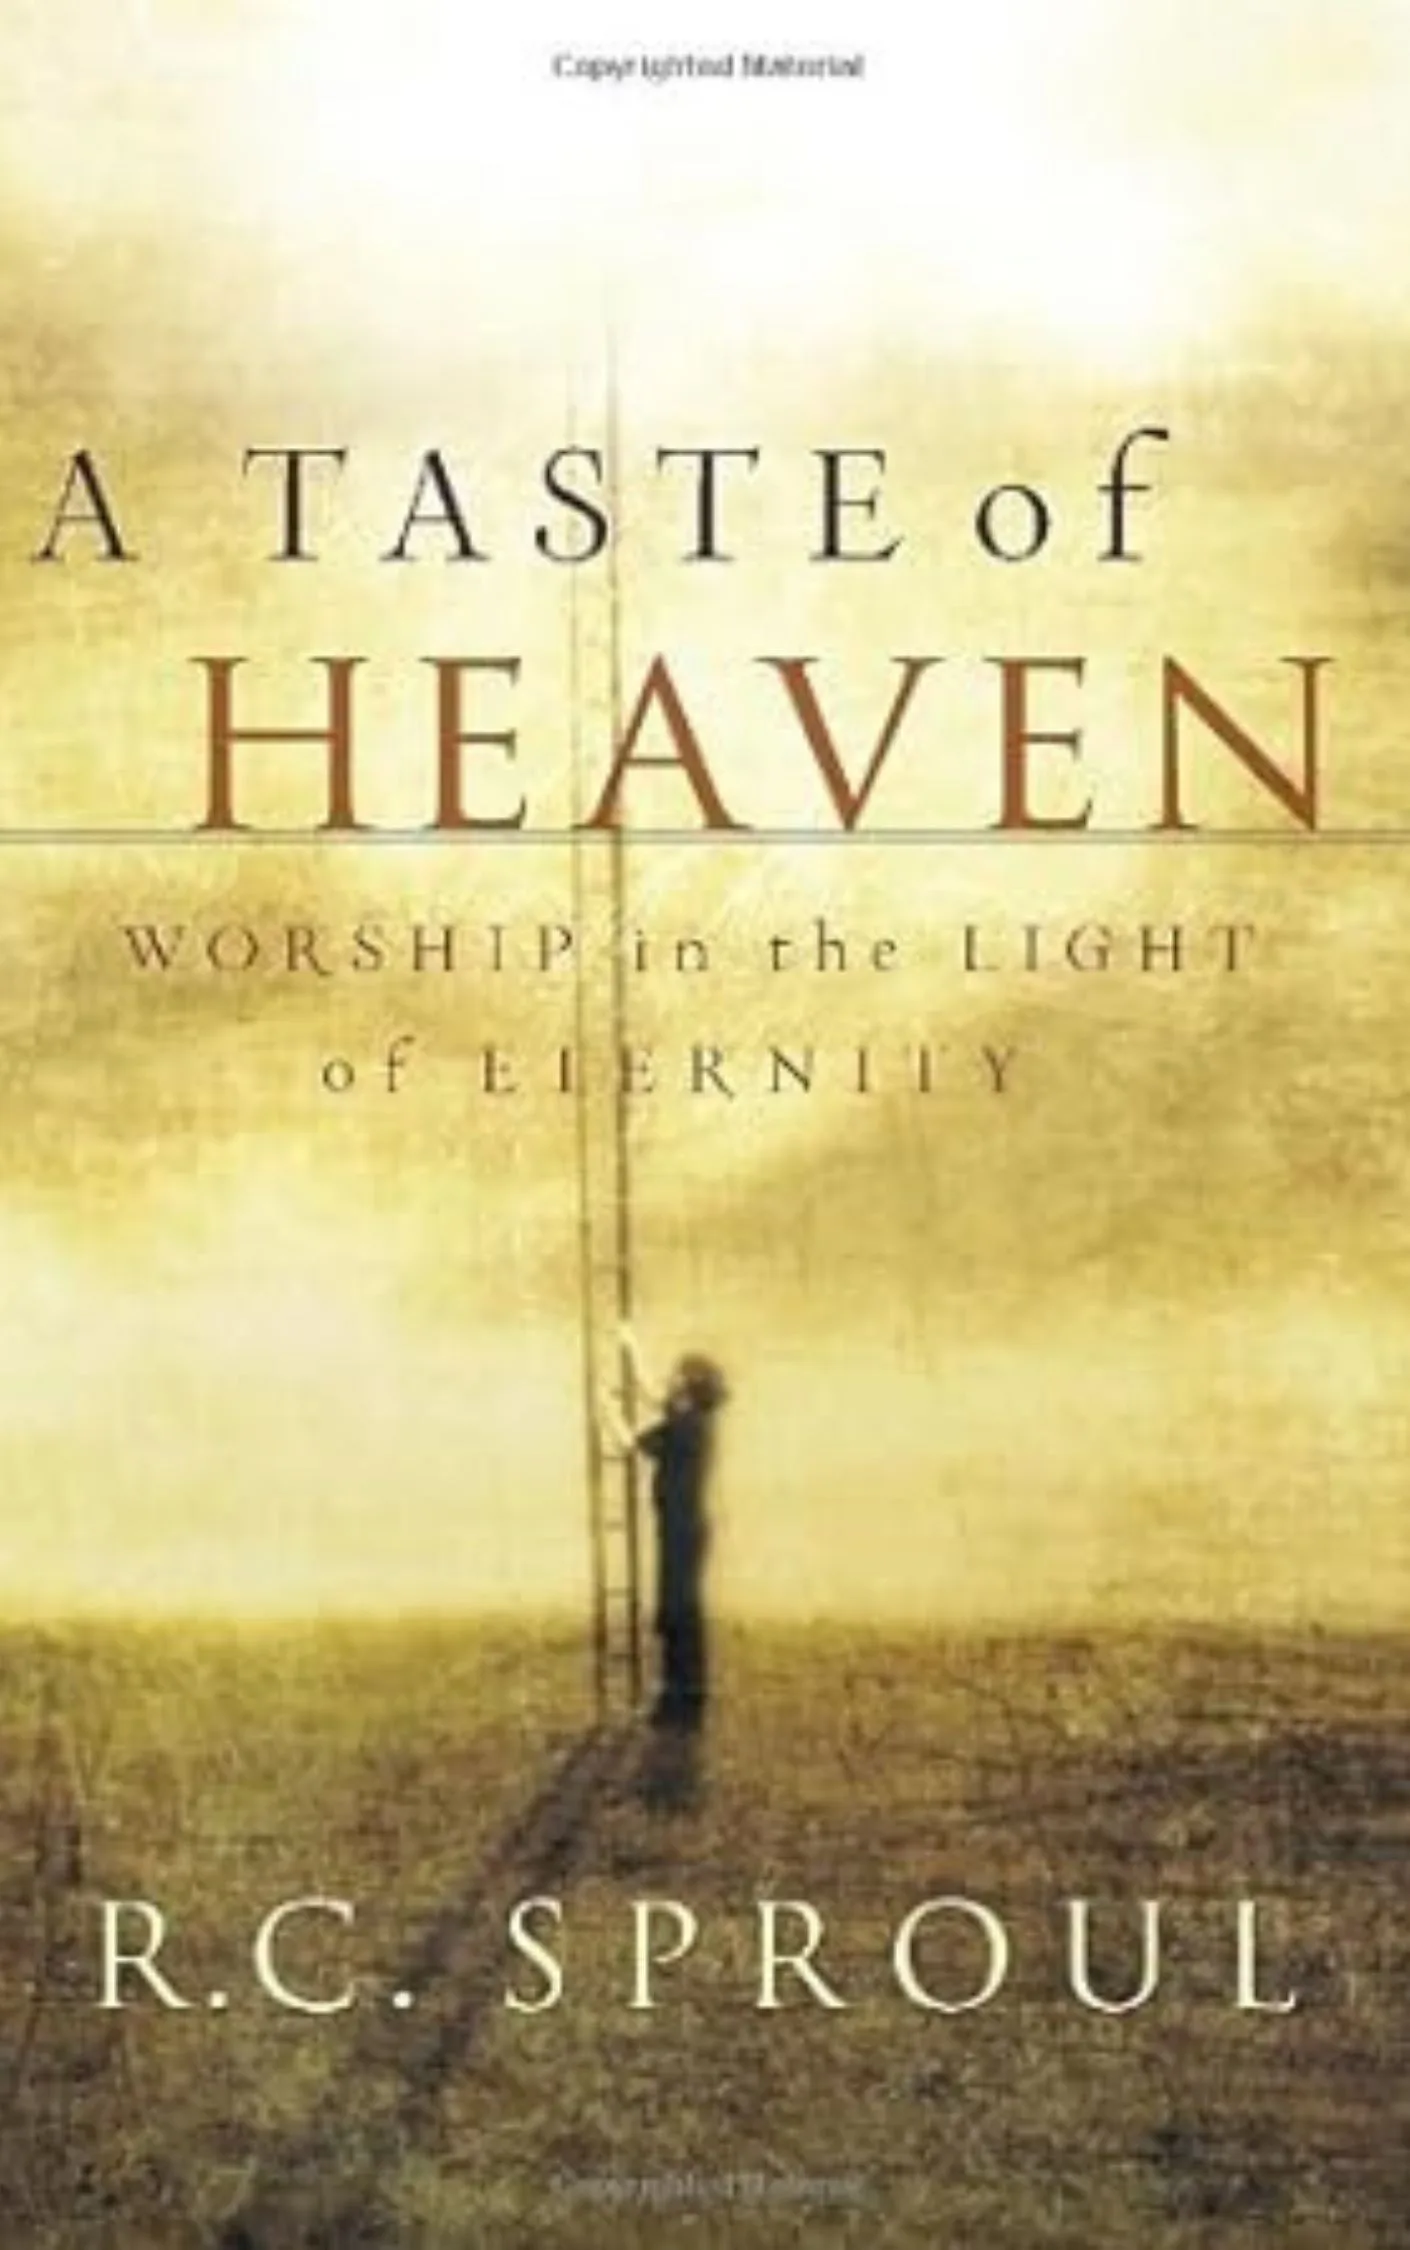 A Taste of Heaven: Worship in Light of Eternity by R.C. Sproul